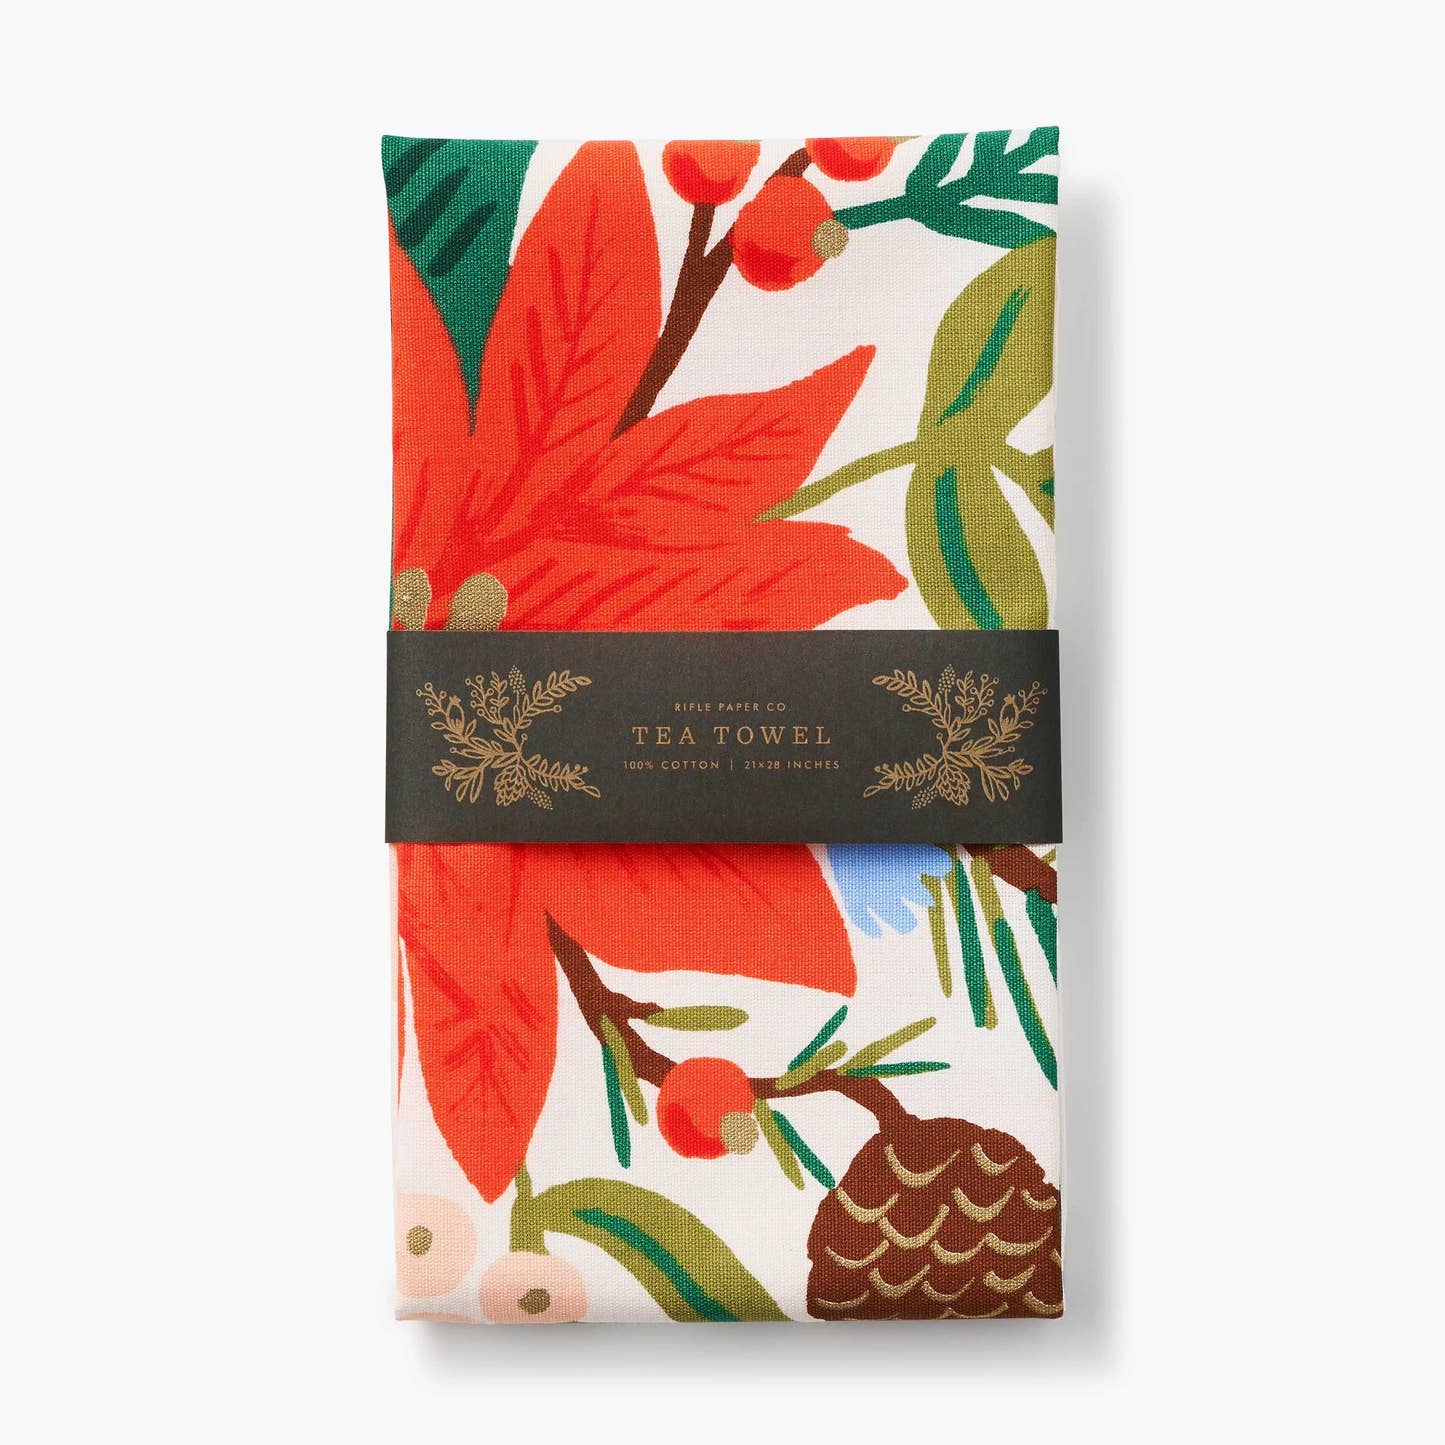 Folded Rifle Paper Co Holiday Bouquet Tea Towel printed in red, green, pink, and blue packaged with printed paper band that says "Rifle Paper Co Tea Towel 100% Cotton | 21x28 inches" in gold print with floral designs